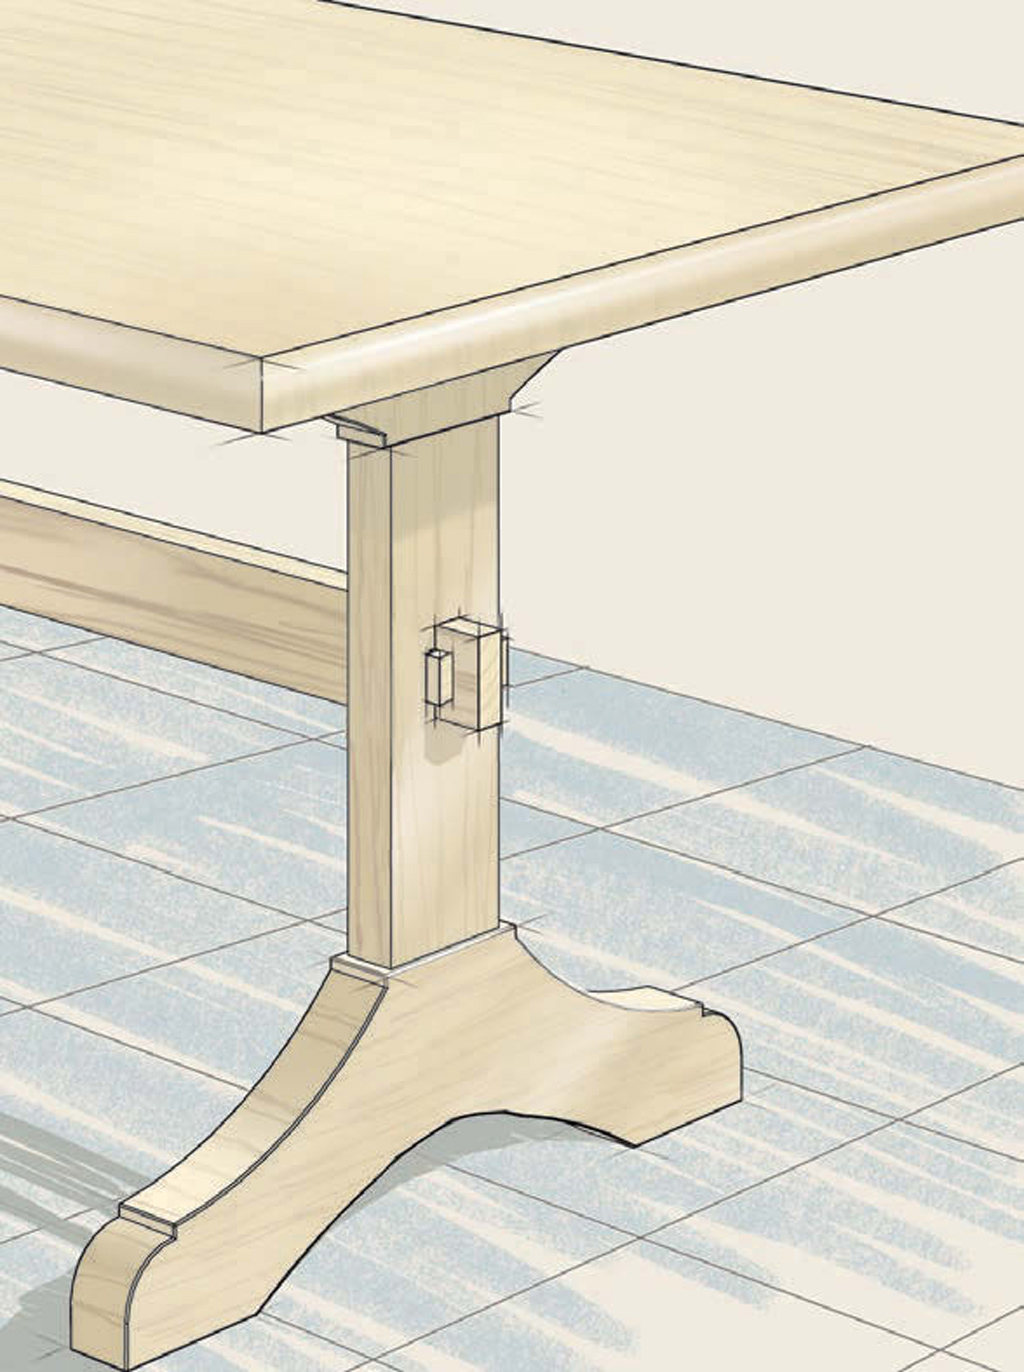 Loose-Wedge Mortise & Tenon Joints